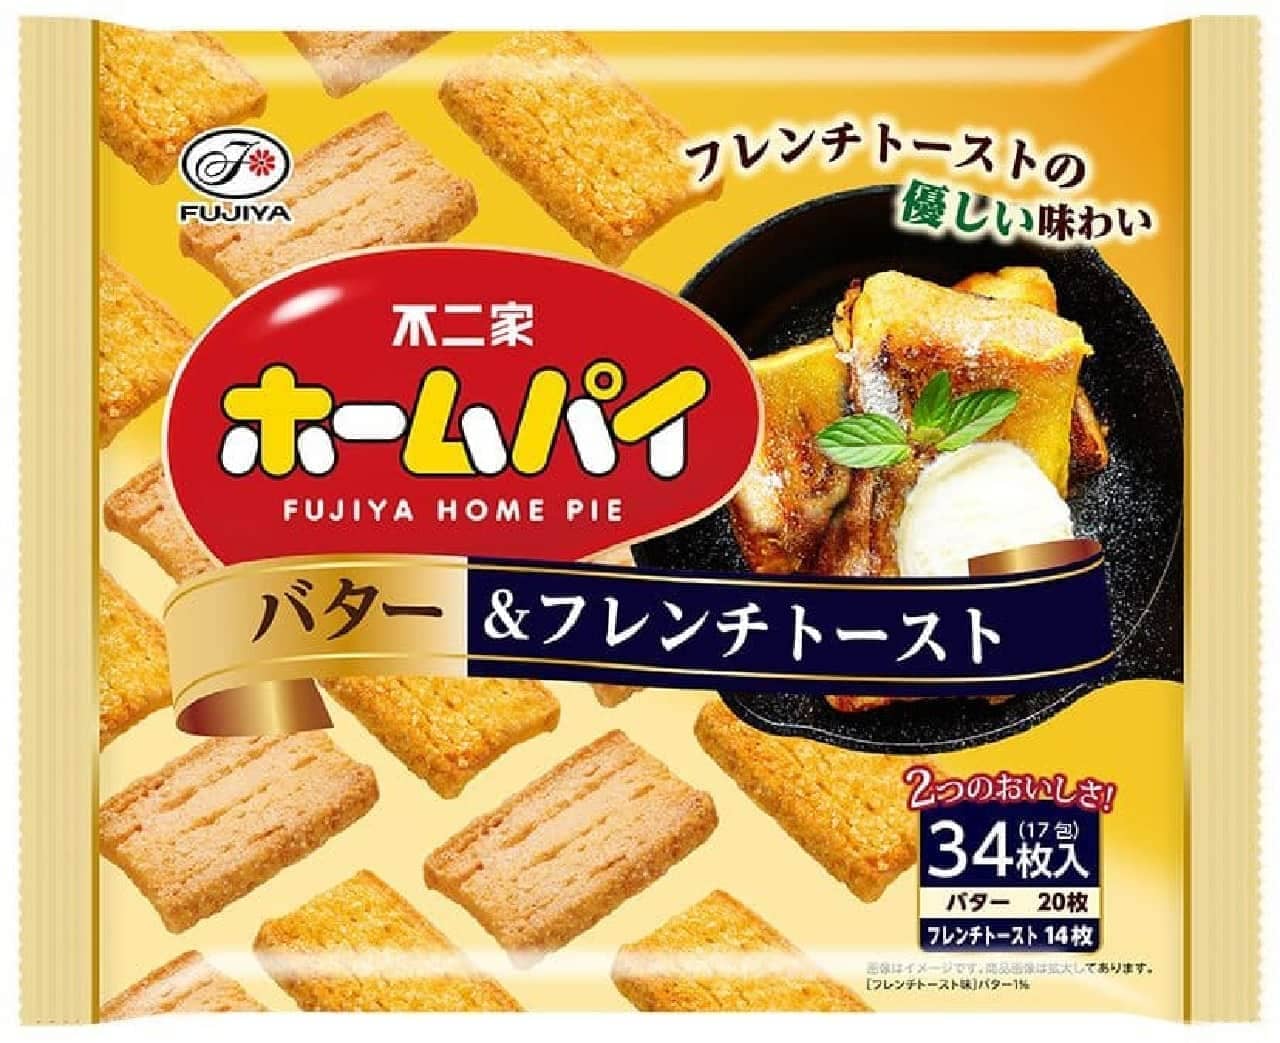 Fujiya "Home Pie (Butter & French Toast)"